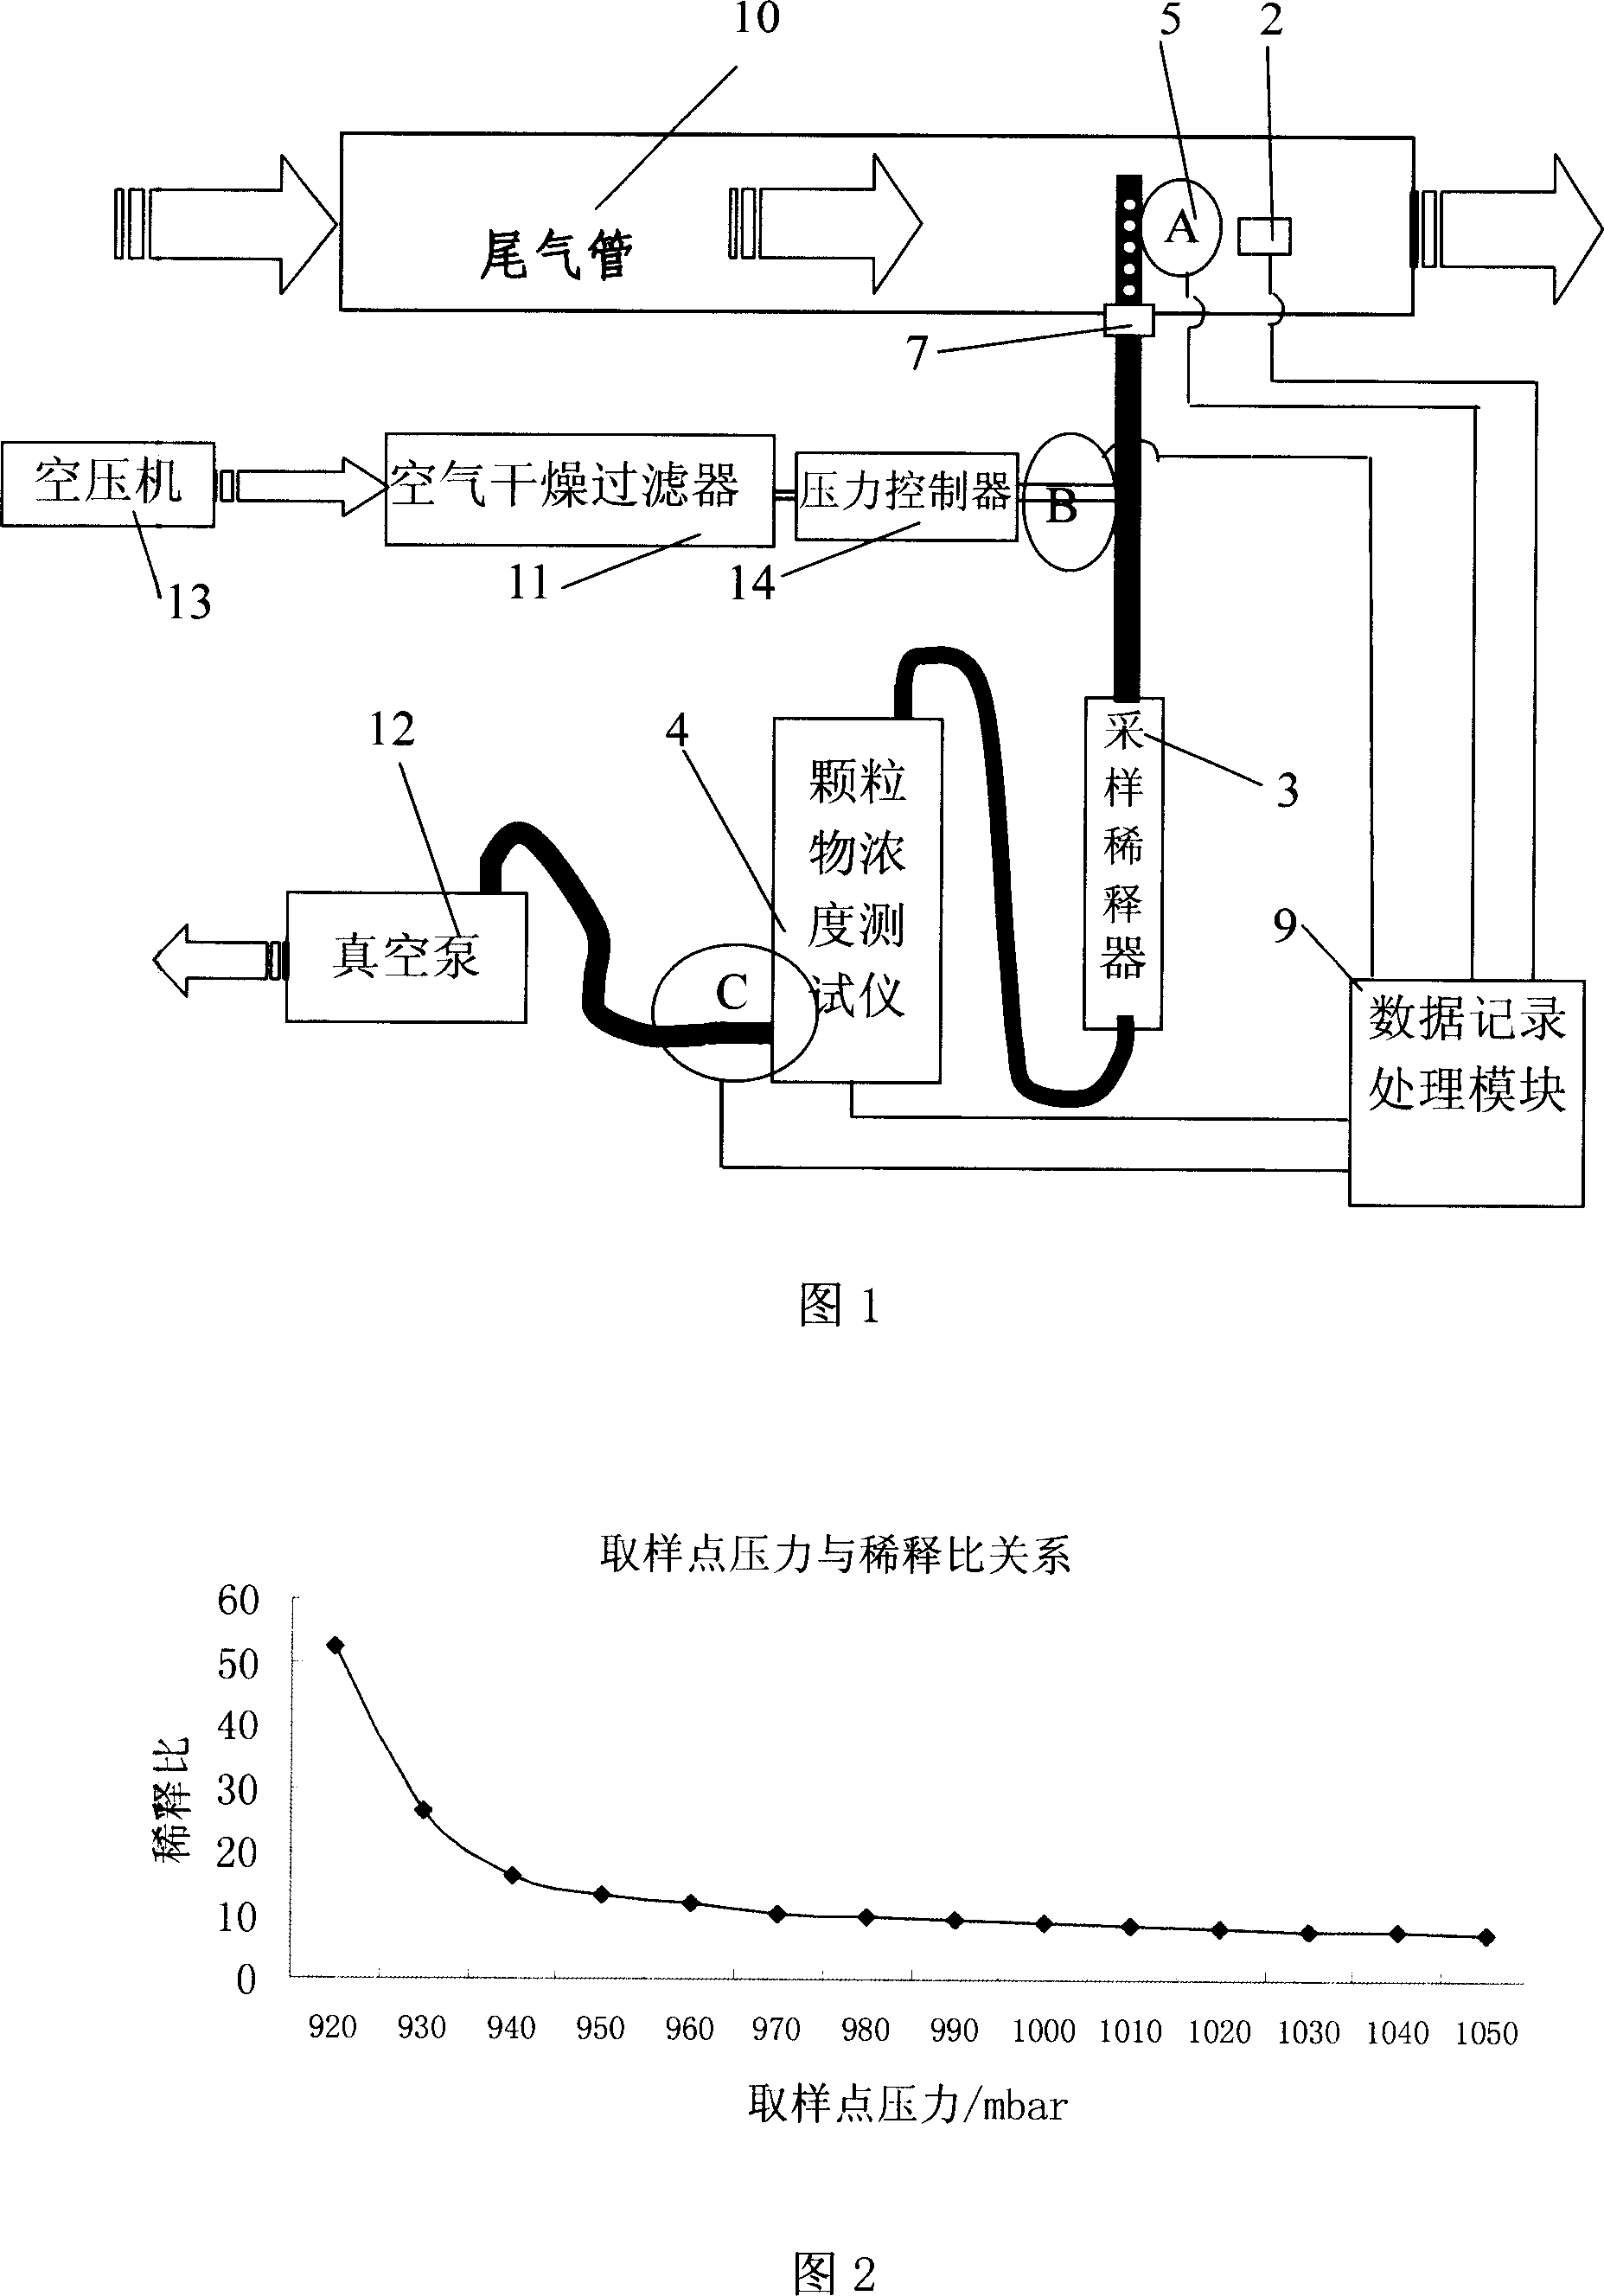 Devices and methods for measuring granular material discharged by vehicle